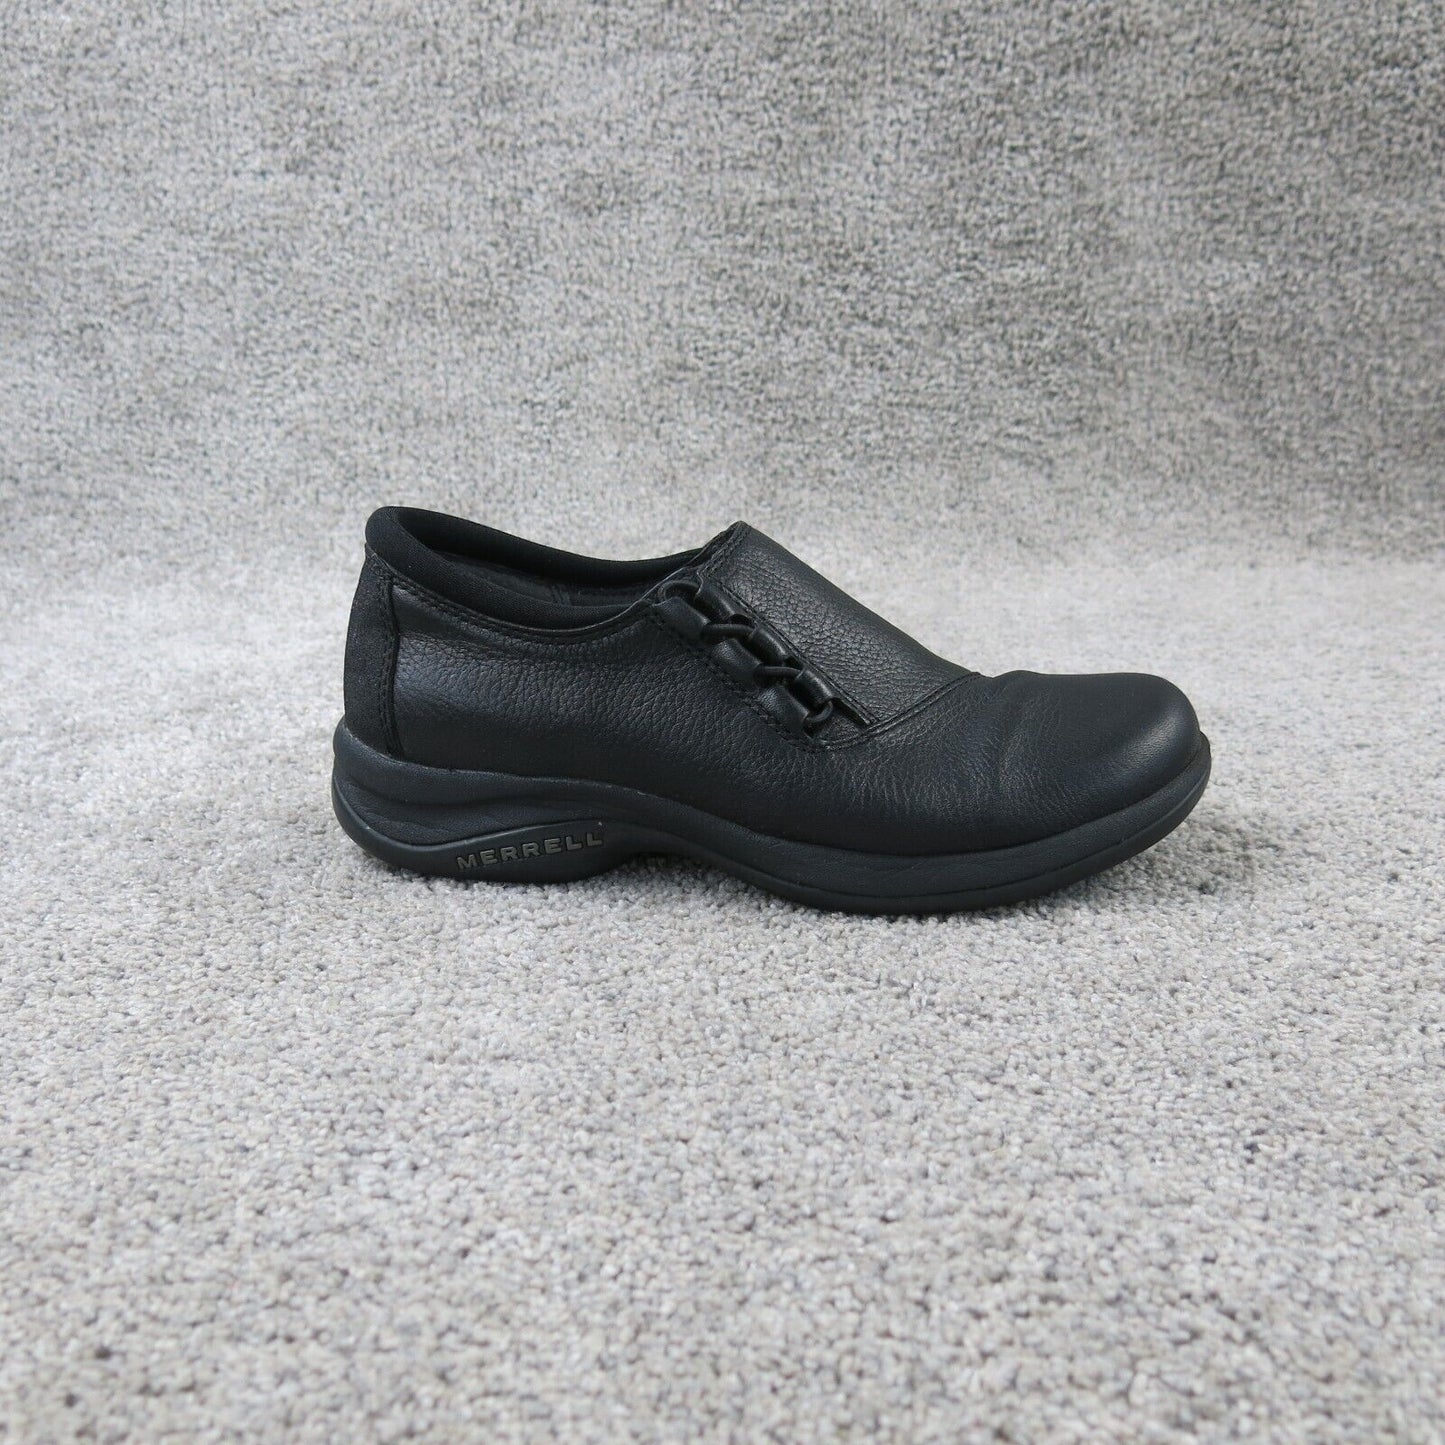 Merrell Womens Casual Shoes Black Topo Twist Leather Slip On Laced Sides Size 7